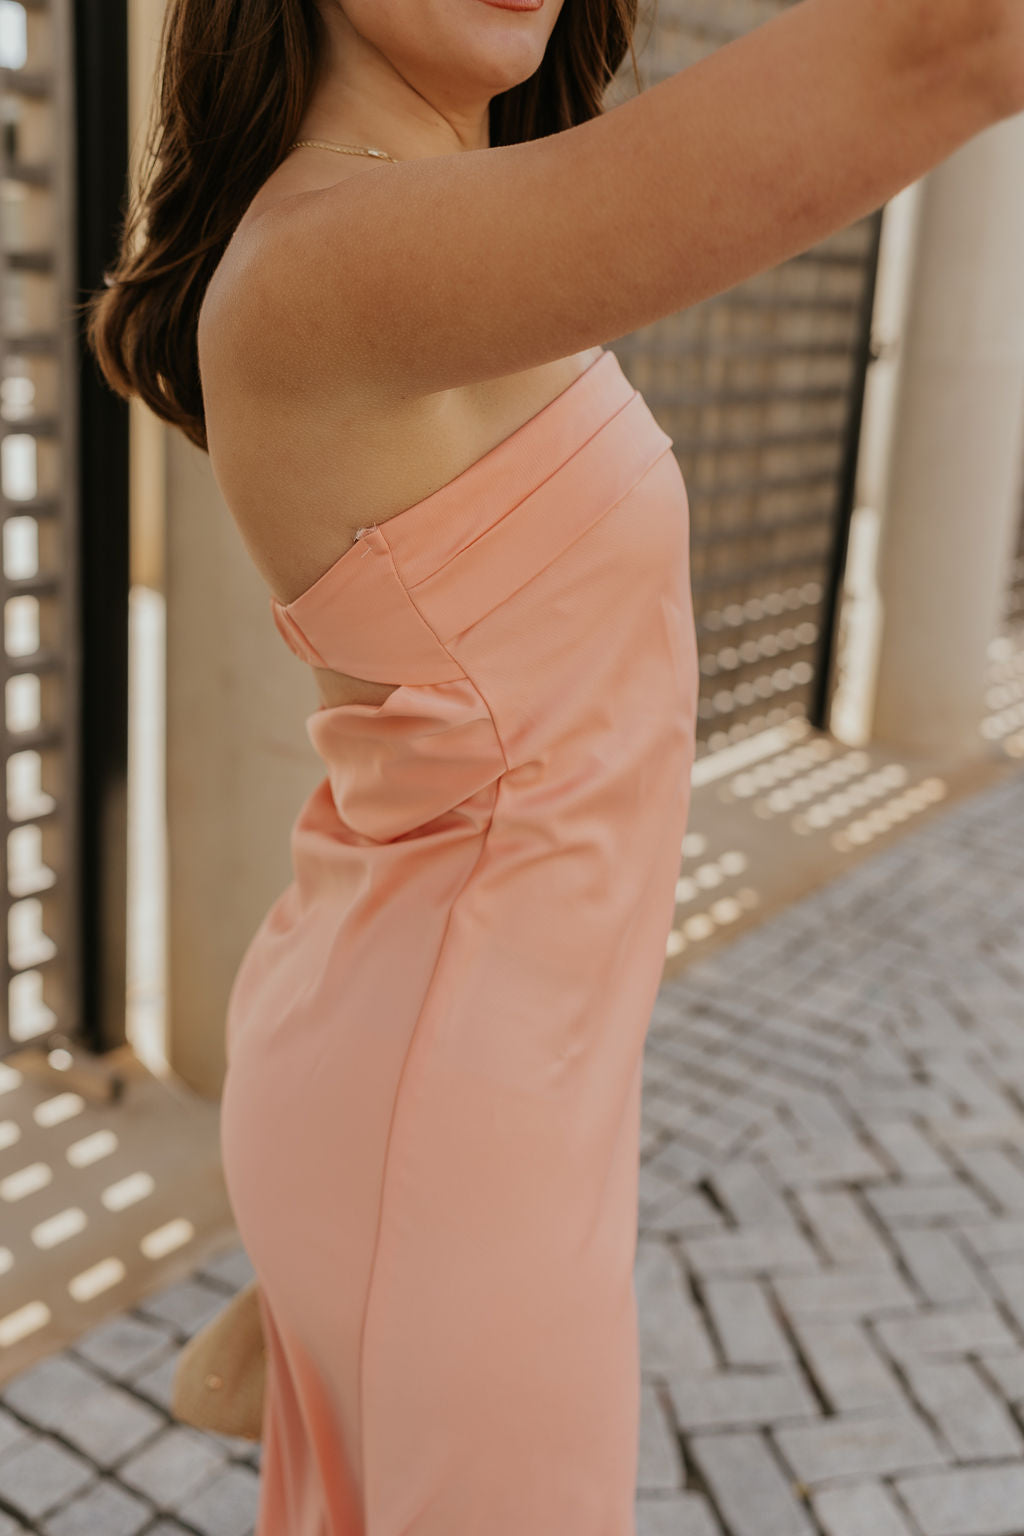 Close up side view of female model wearing the Lyla Peach Satin Midi Dress which features Peach Satin Fabric, Maxi Length, Strapless Design, Back Cut-Out Design and Monochrome Side Zipper with Hook Closure